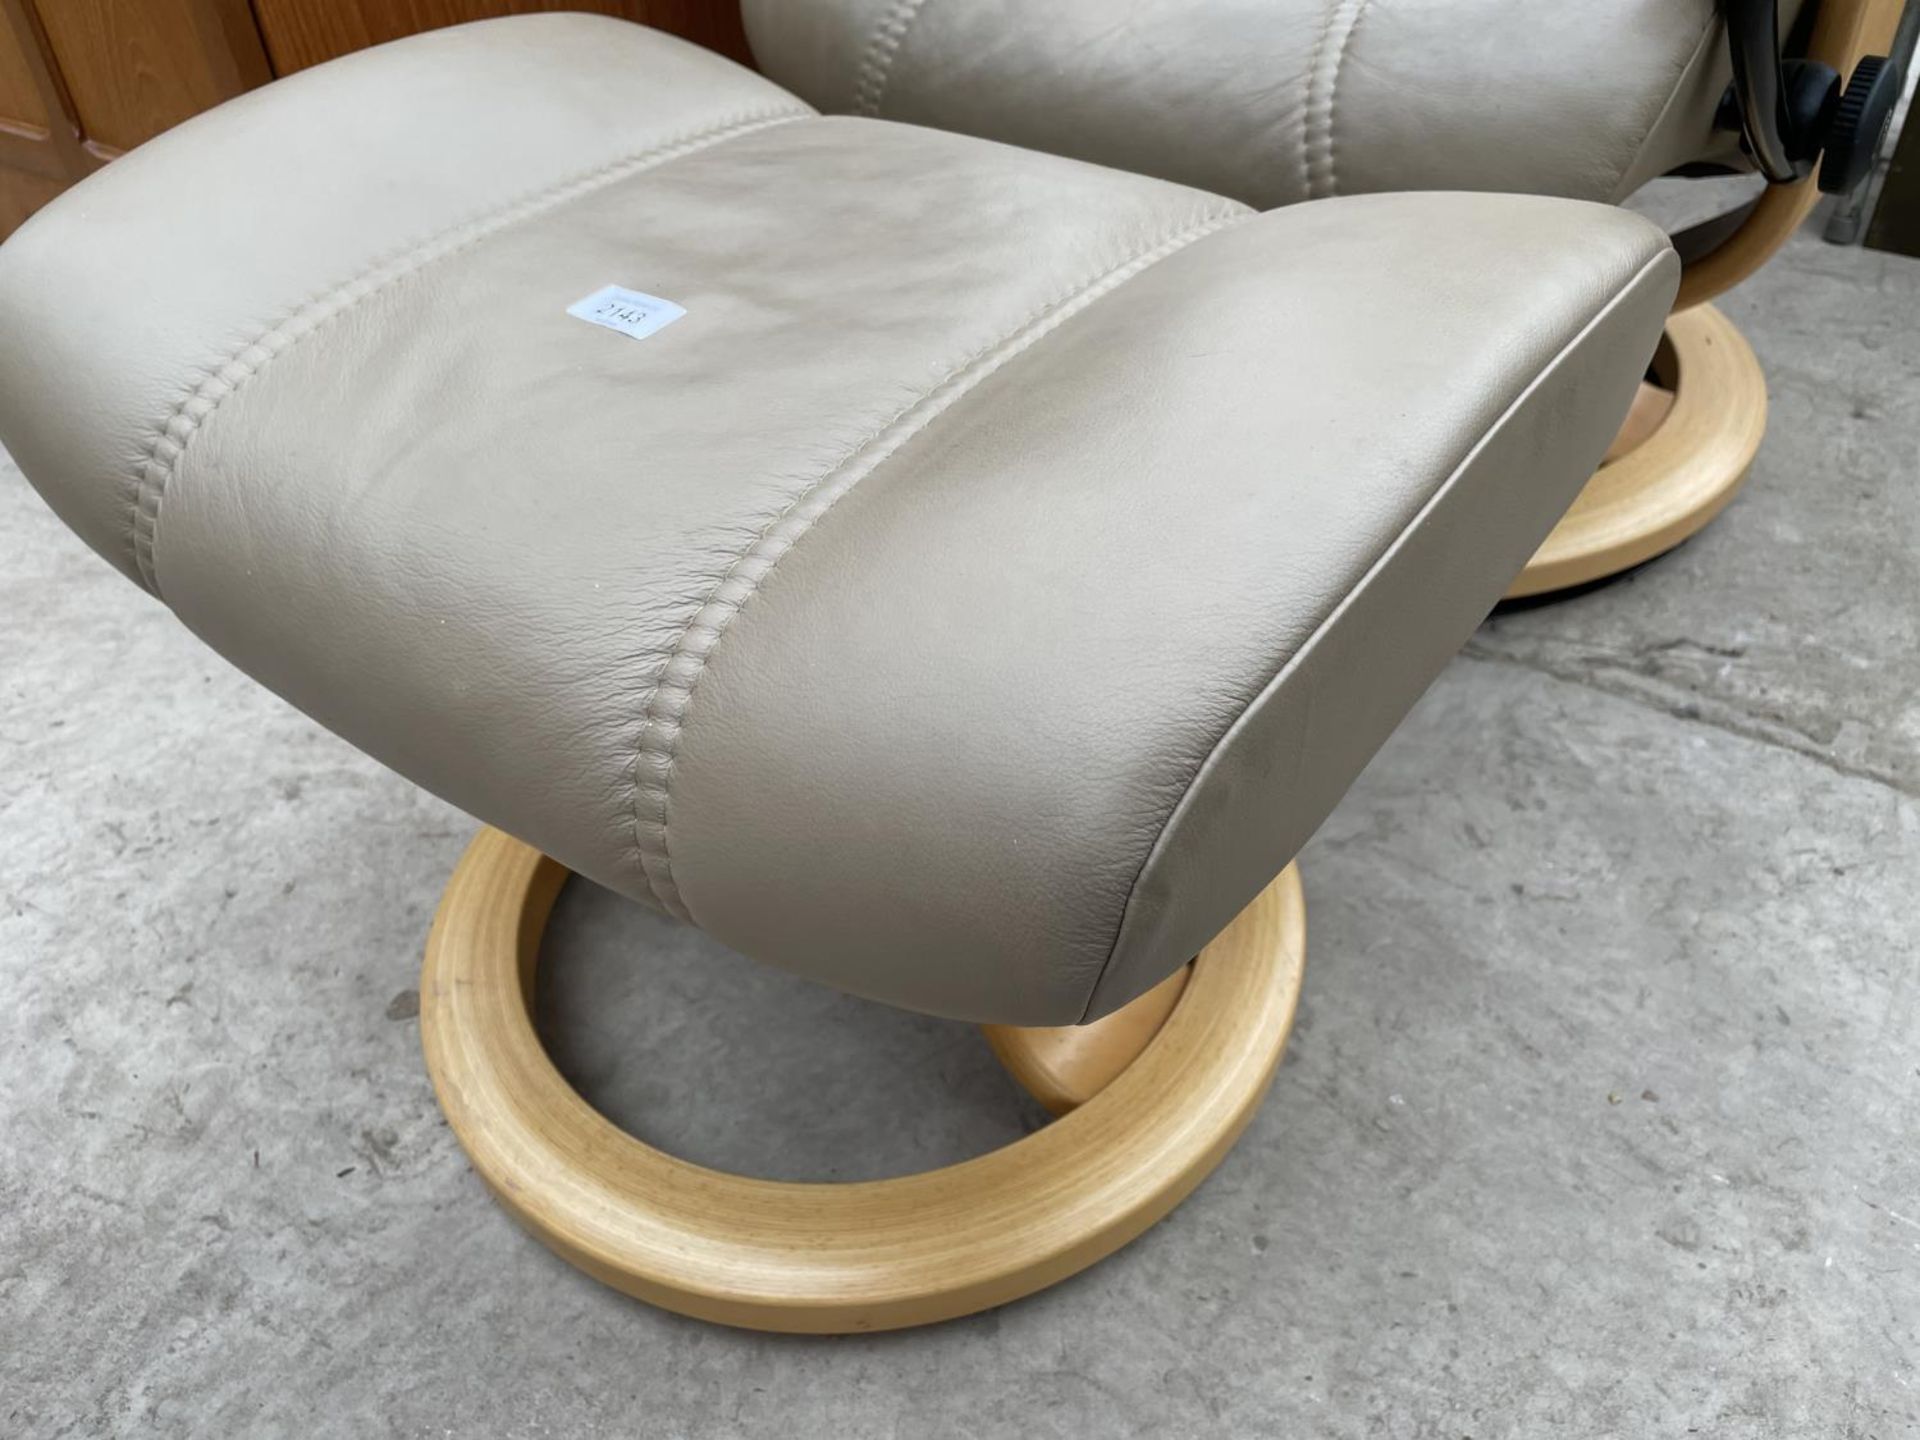 A STRESSLESS EKORNES RECLINER CHAIR COMPLETE WITH STOOL - Image 7 of 8